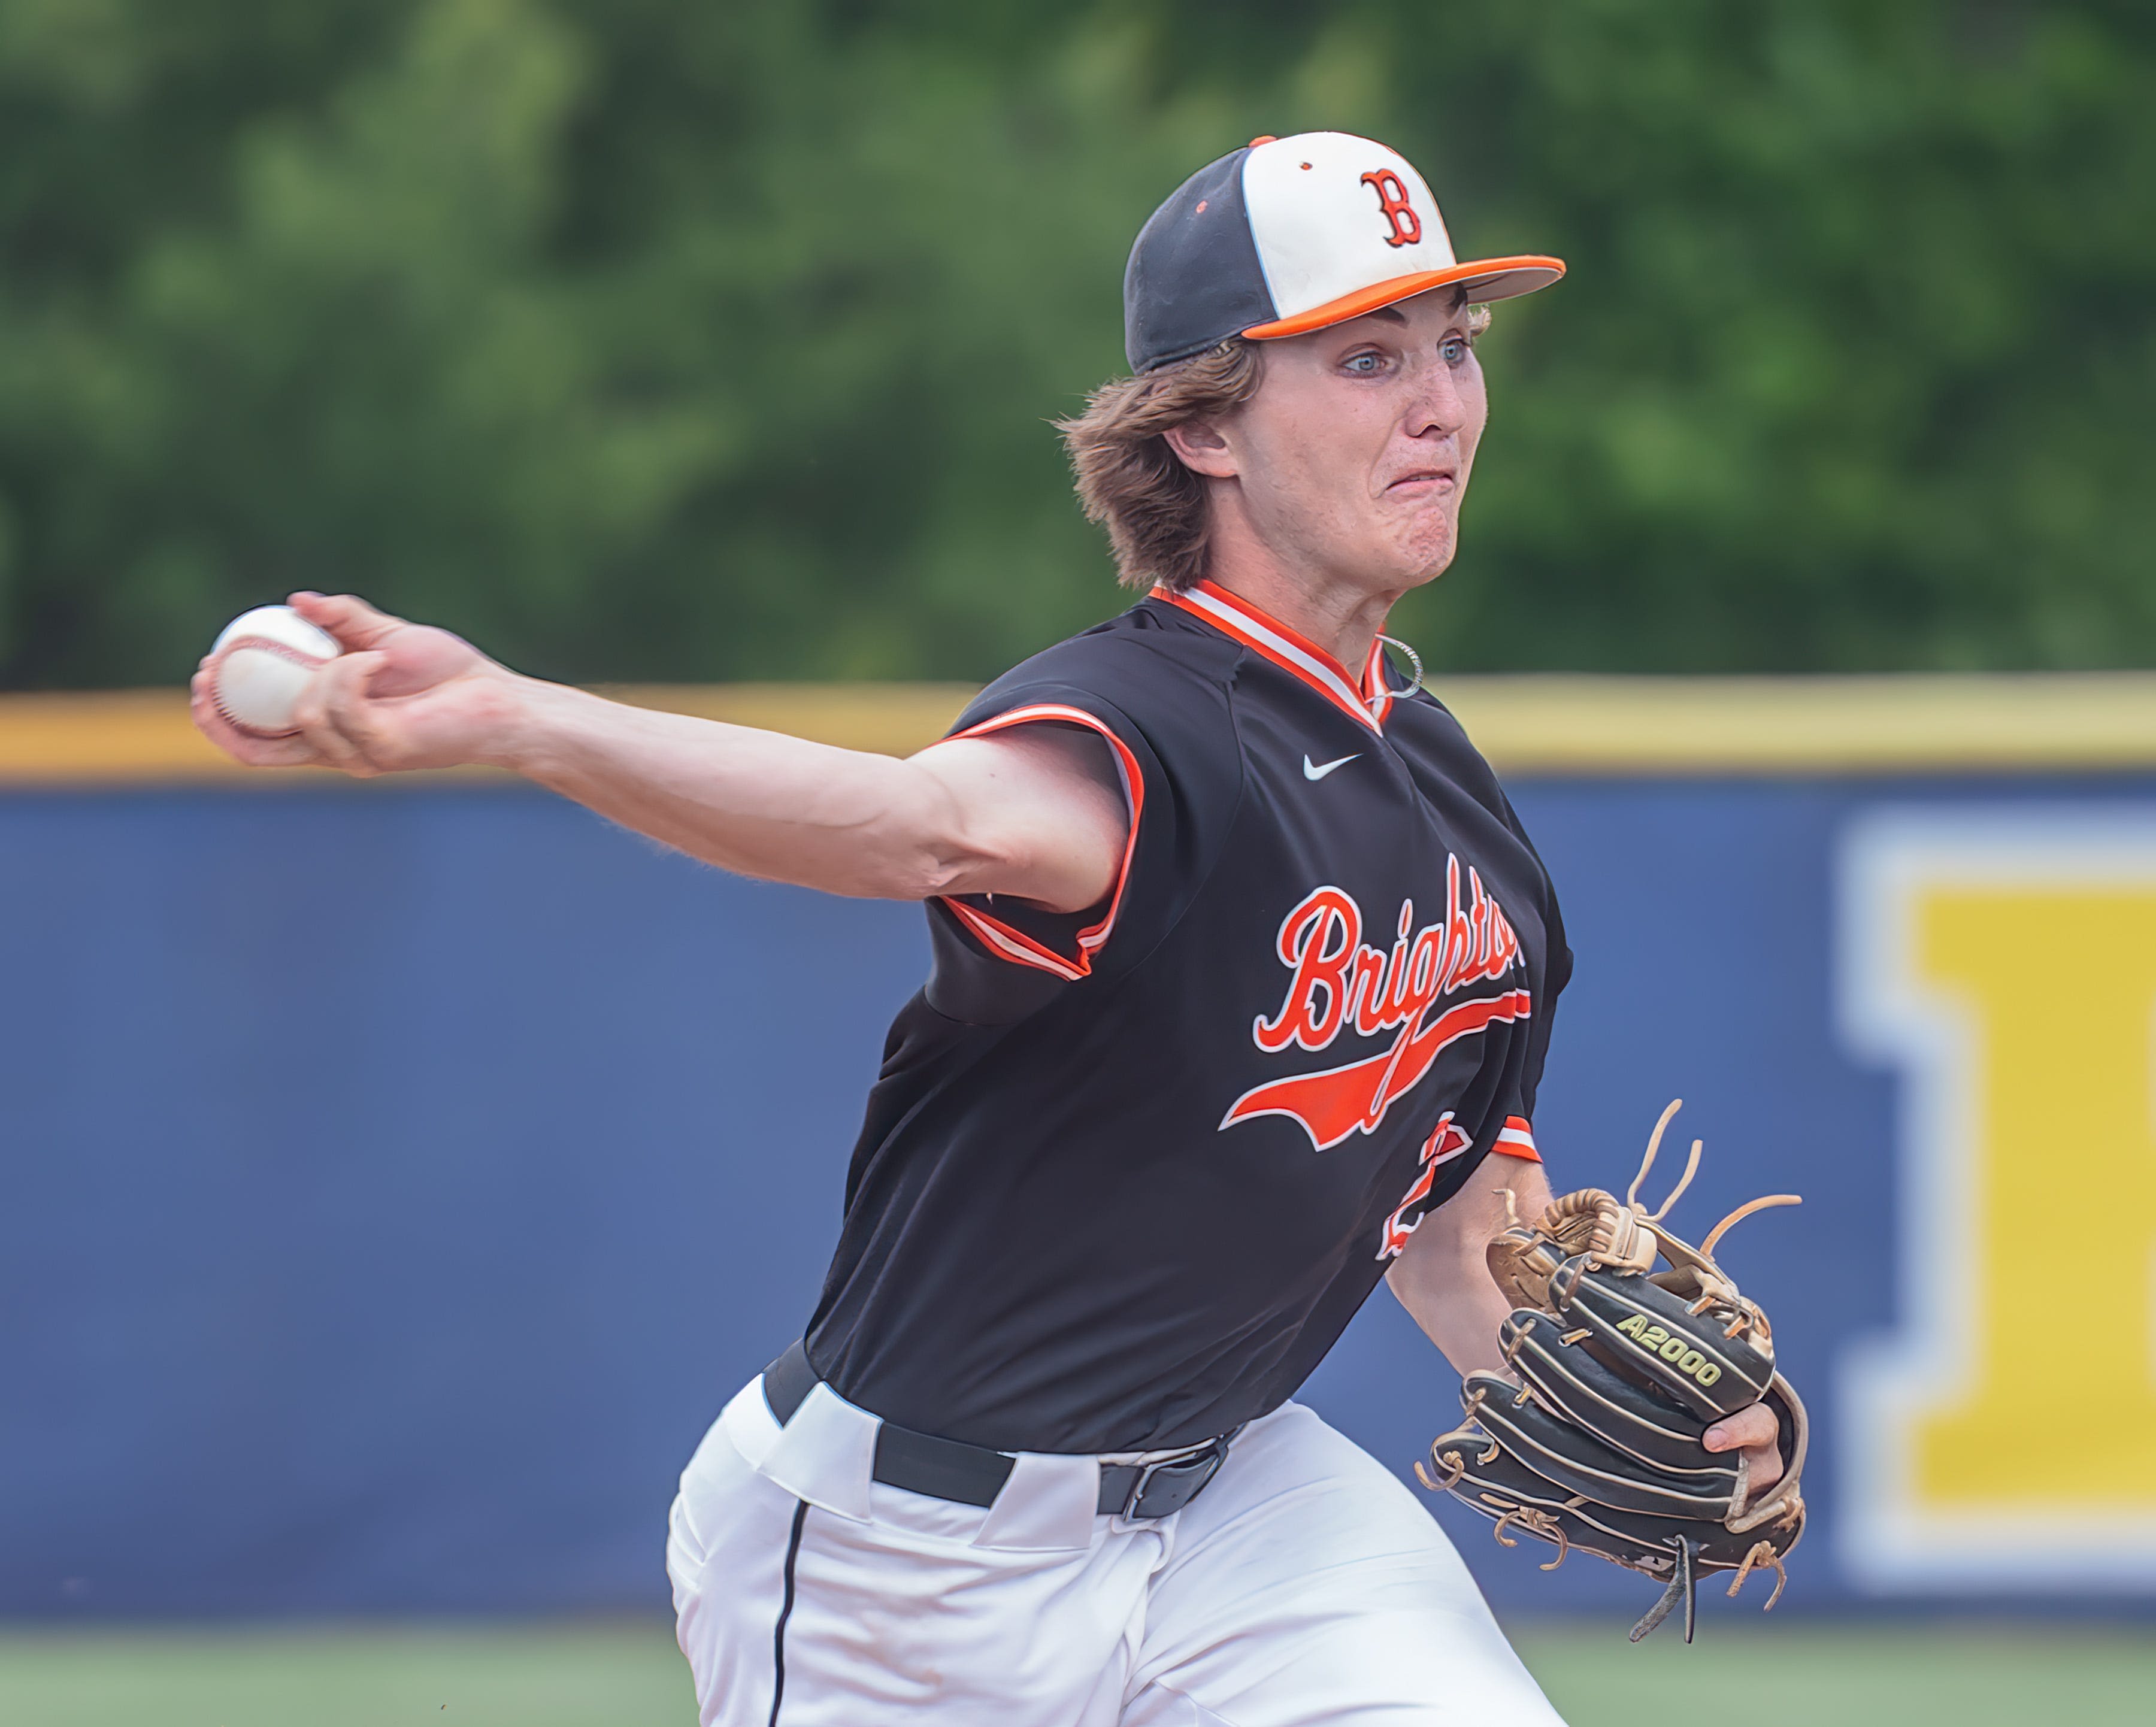 Brighton's Andrew Everson named Livingston County's baseball Player of the Year